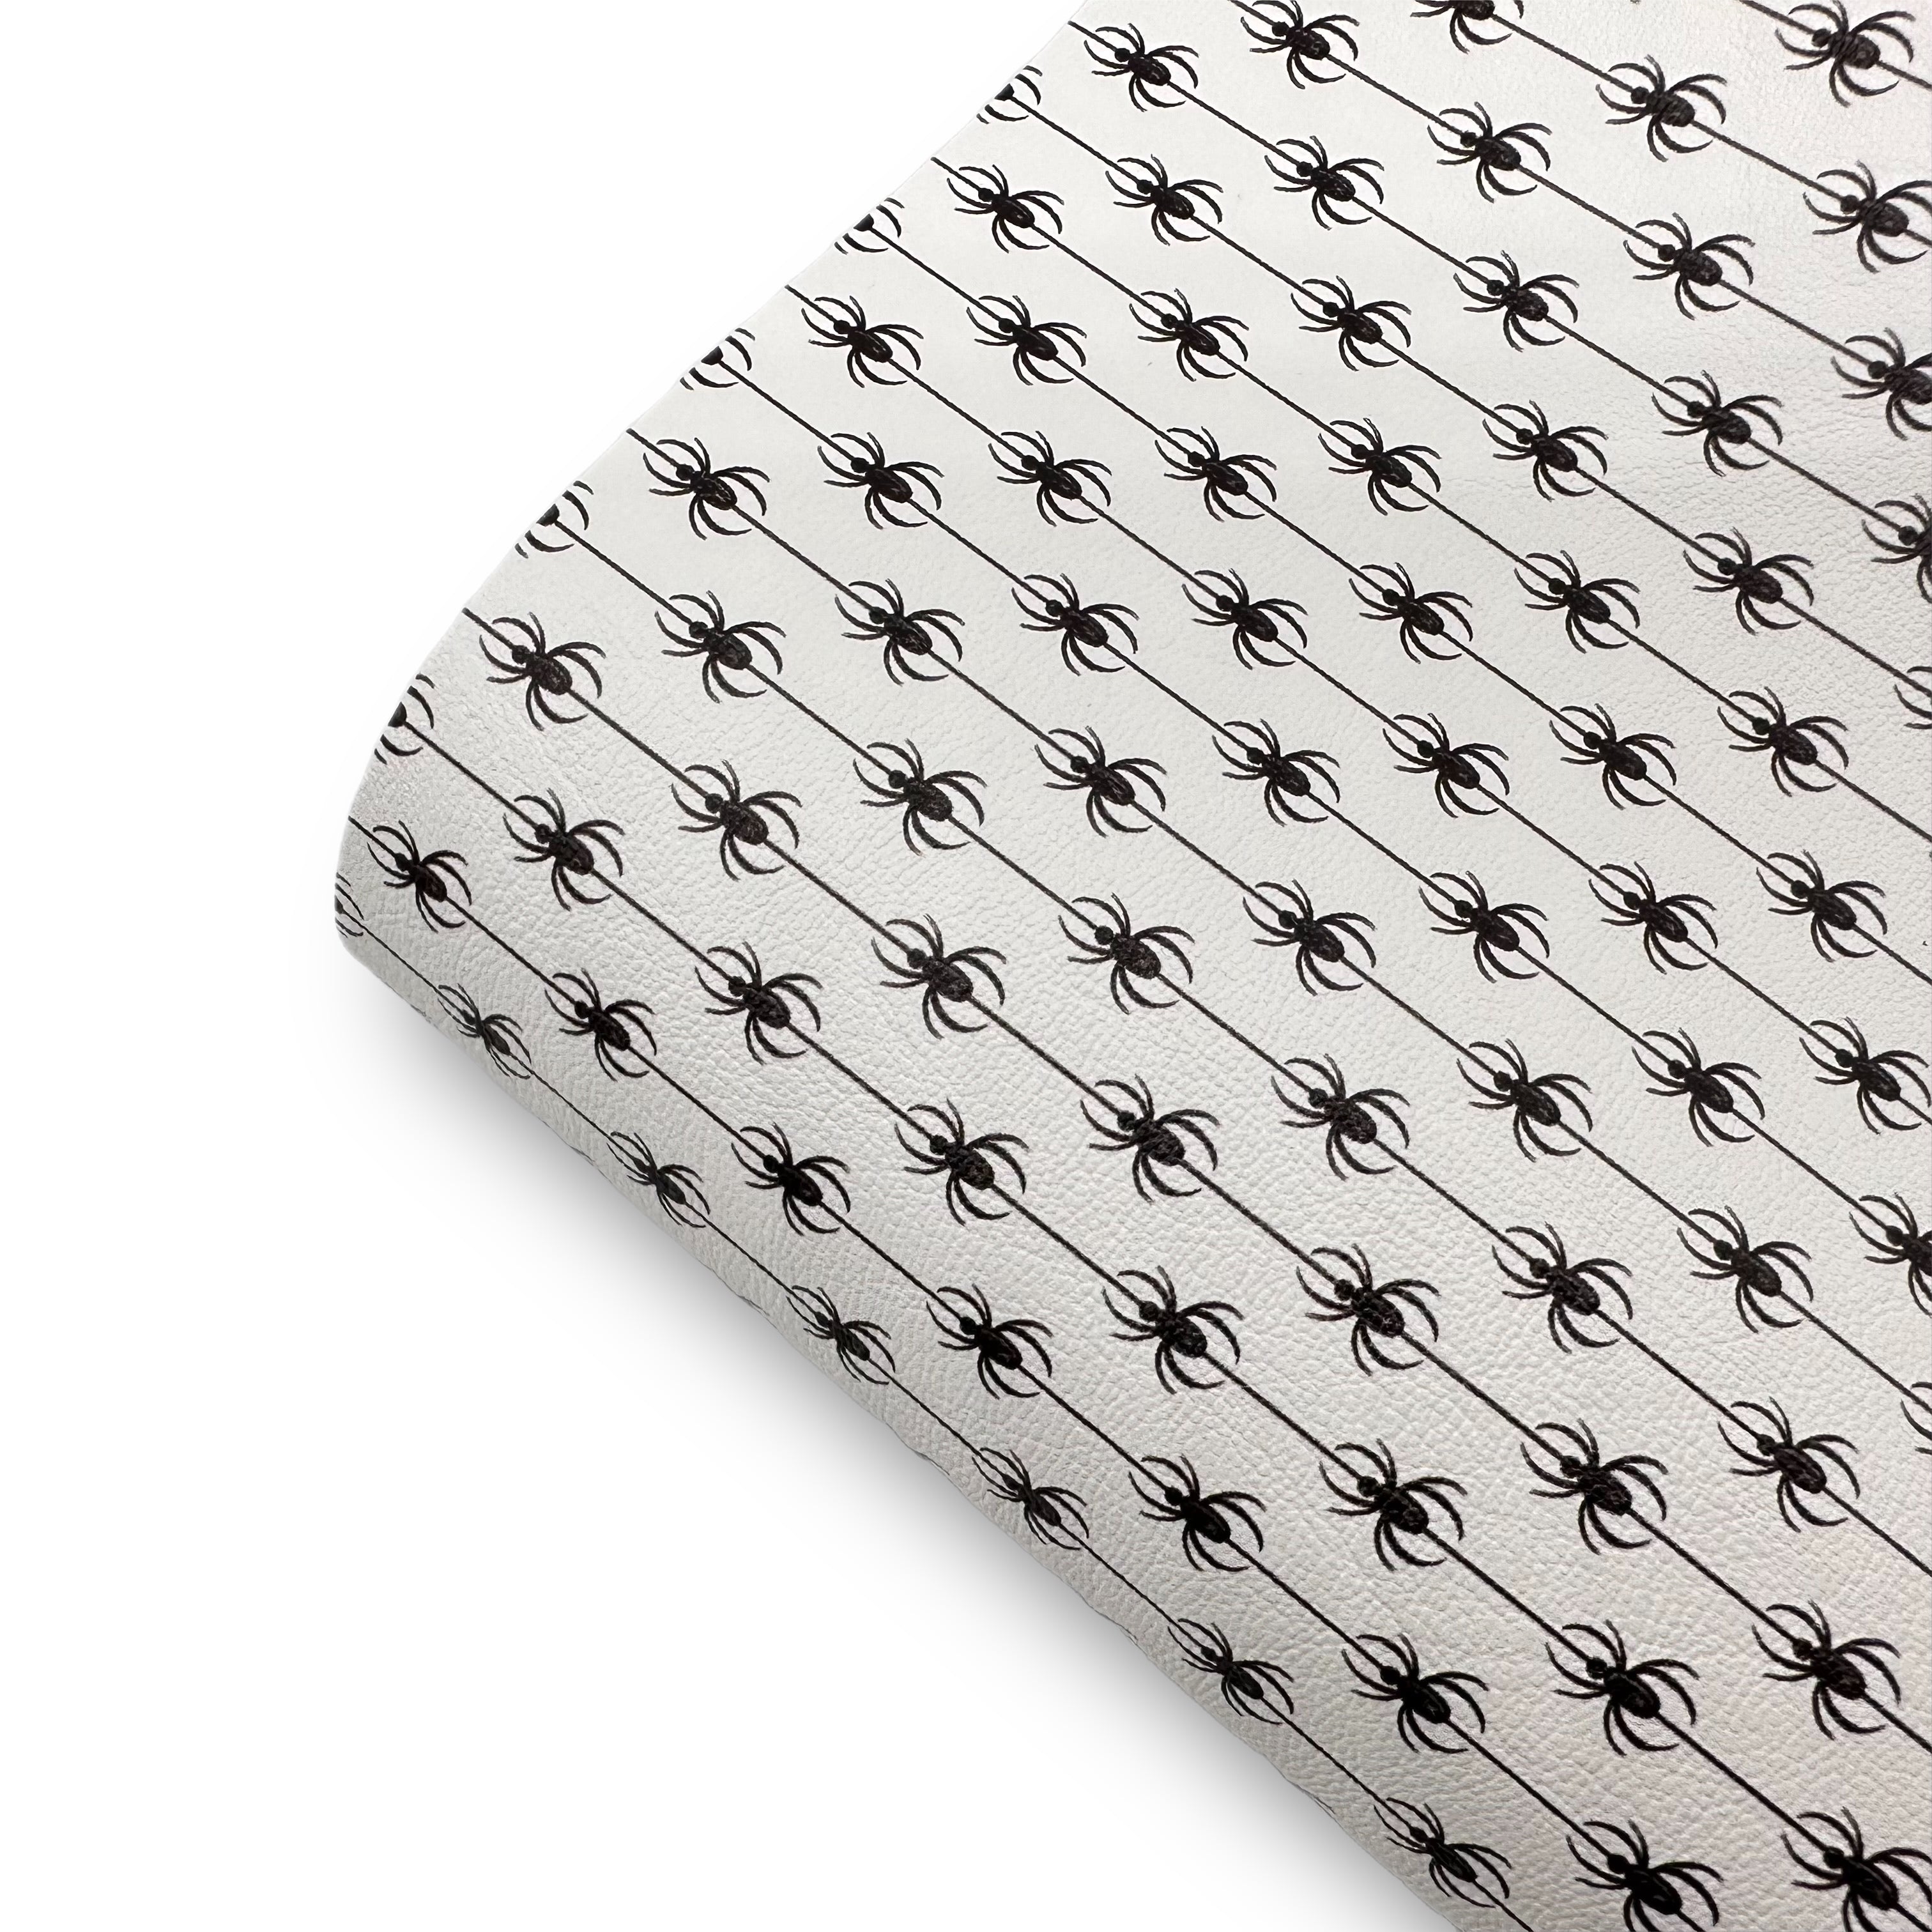 Dangly Spiders Premium Faux Leather Fabric Sheets